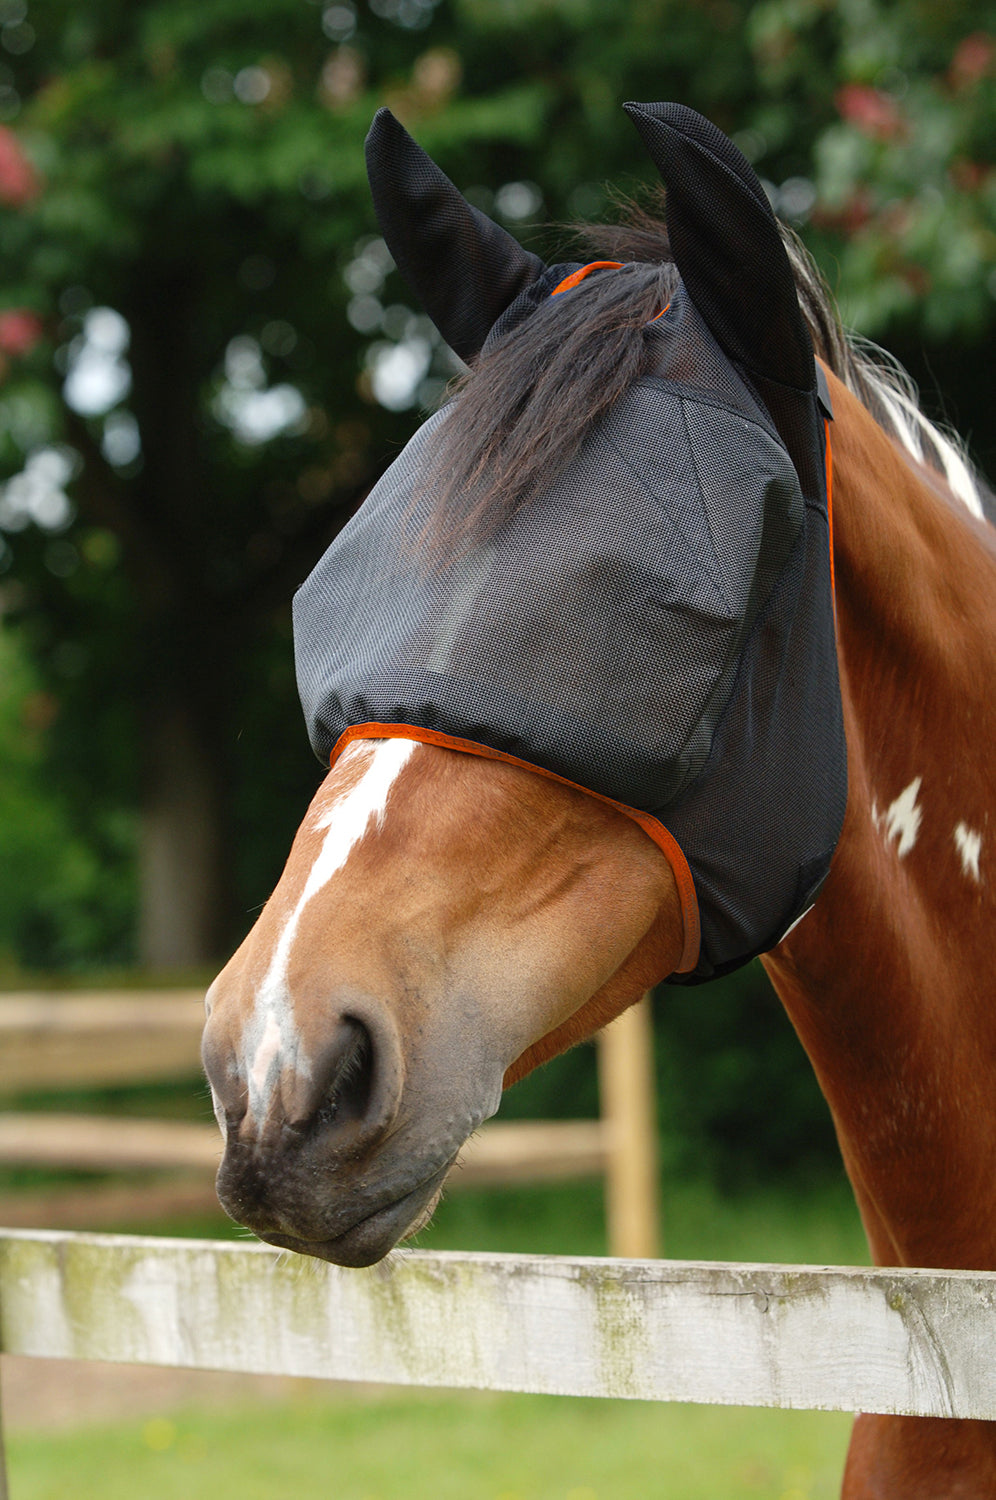 Equilibrium Field Relief Midi Fly Mask With Ears